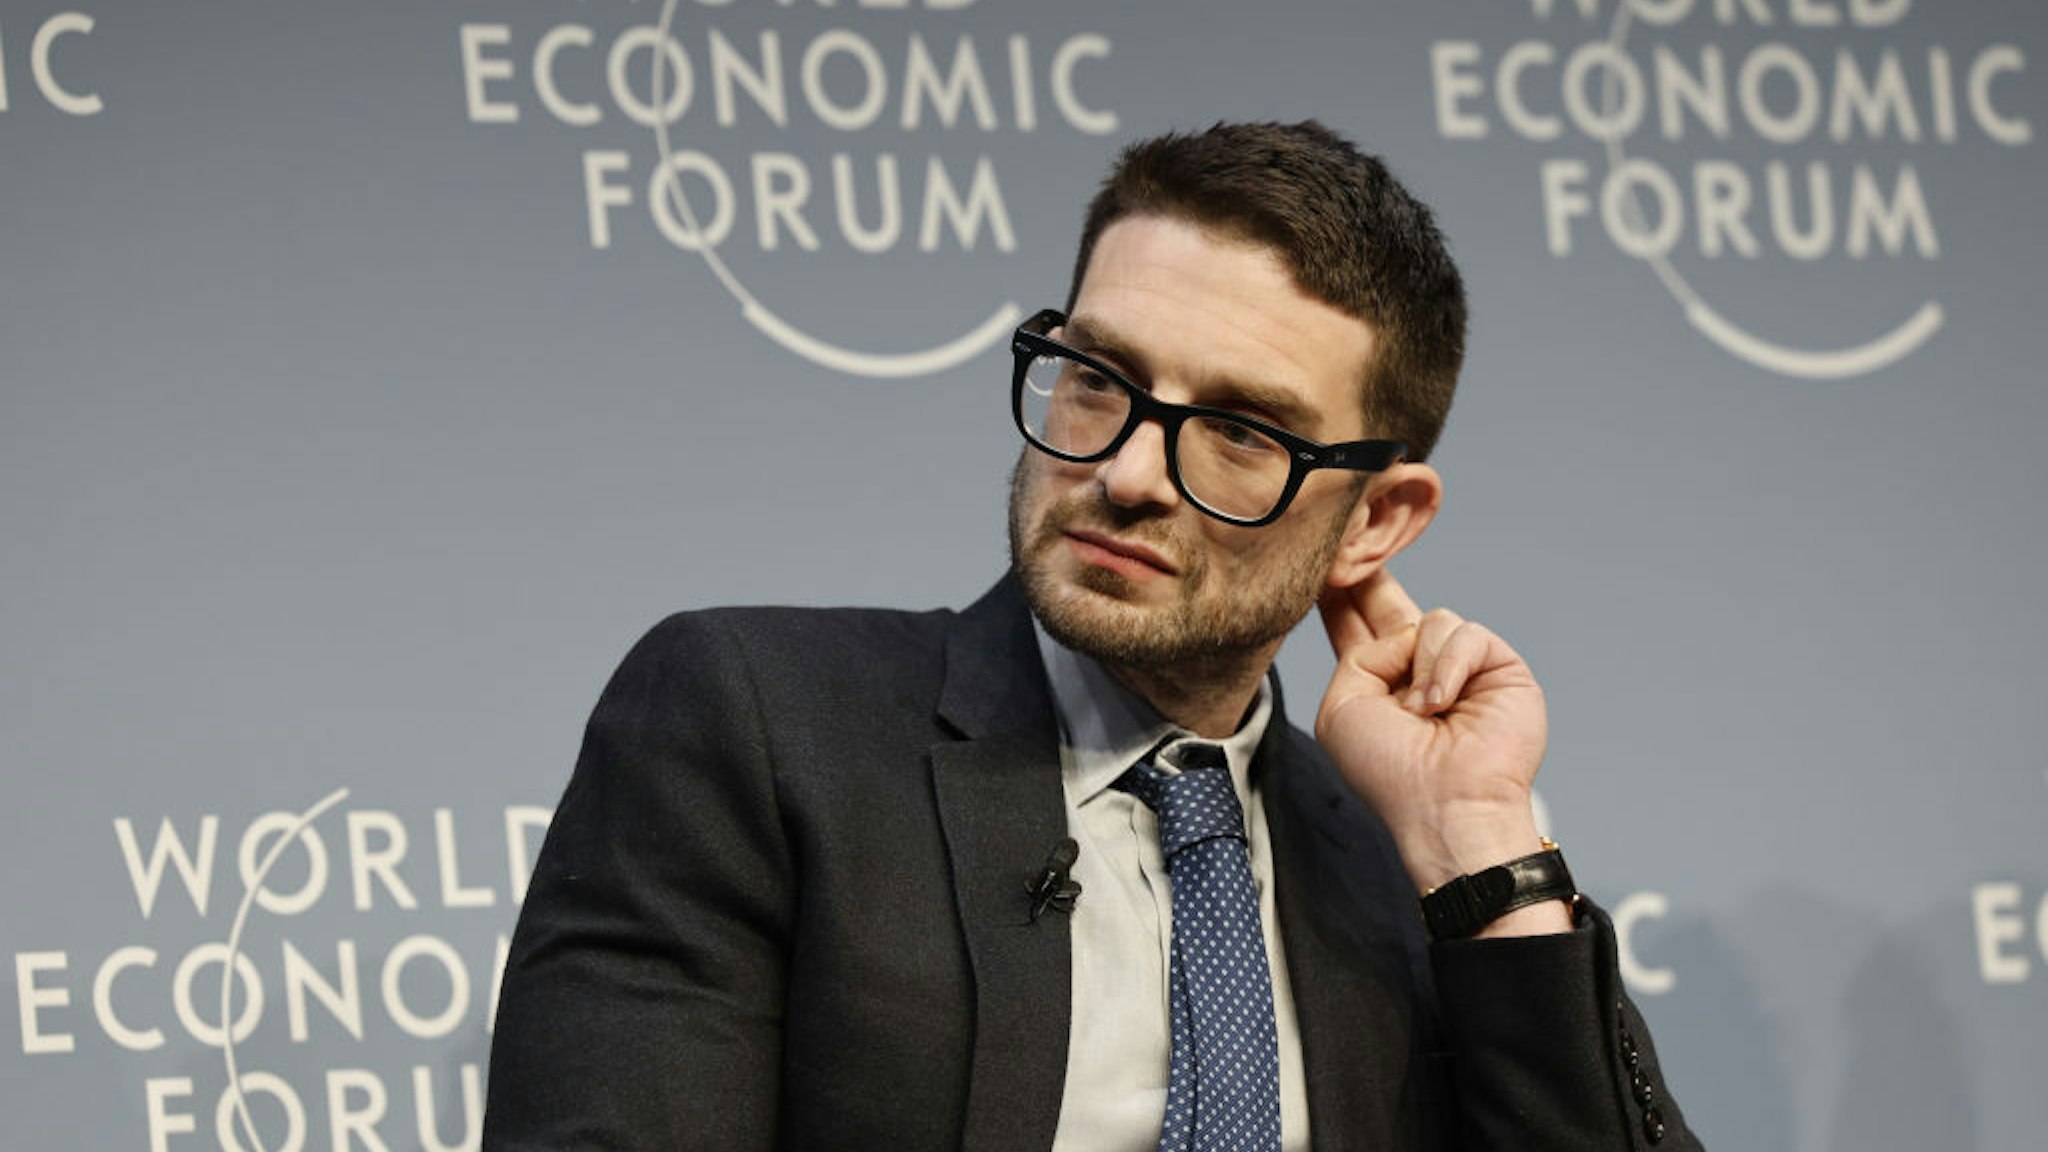 Alex Soros, chairman of Open Society Foundations, during a panel session on the closing day of the World Economic Forum (WEF) in Davos, Switzerland, on Friday, Jan. 19, 2024. The annual Davos gathering of political leaders, top executives and celebrities runs from January 15 to 19. Photographer: Stefan Wermuth/Bloomberg via Getty Images